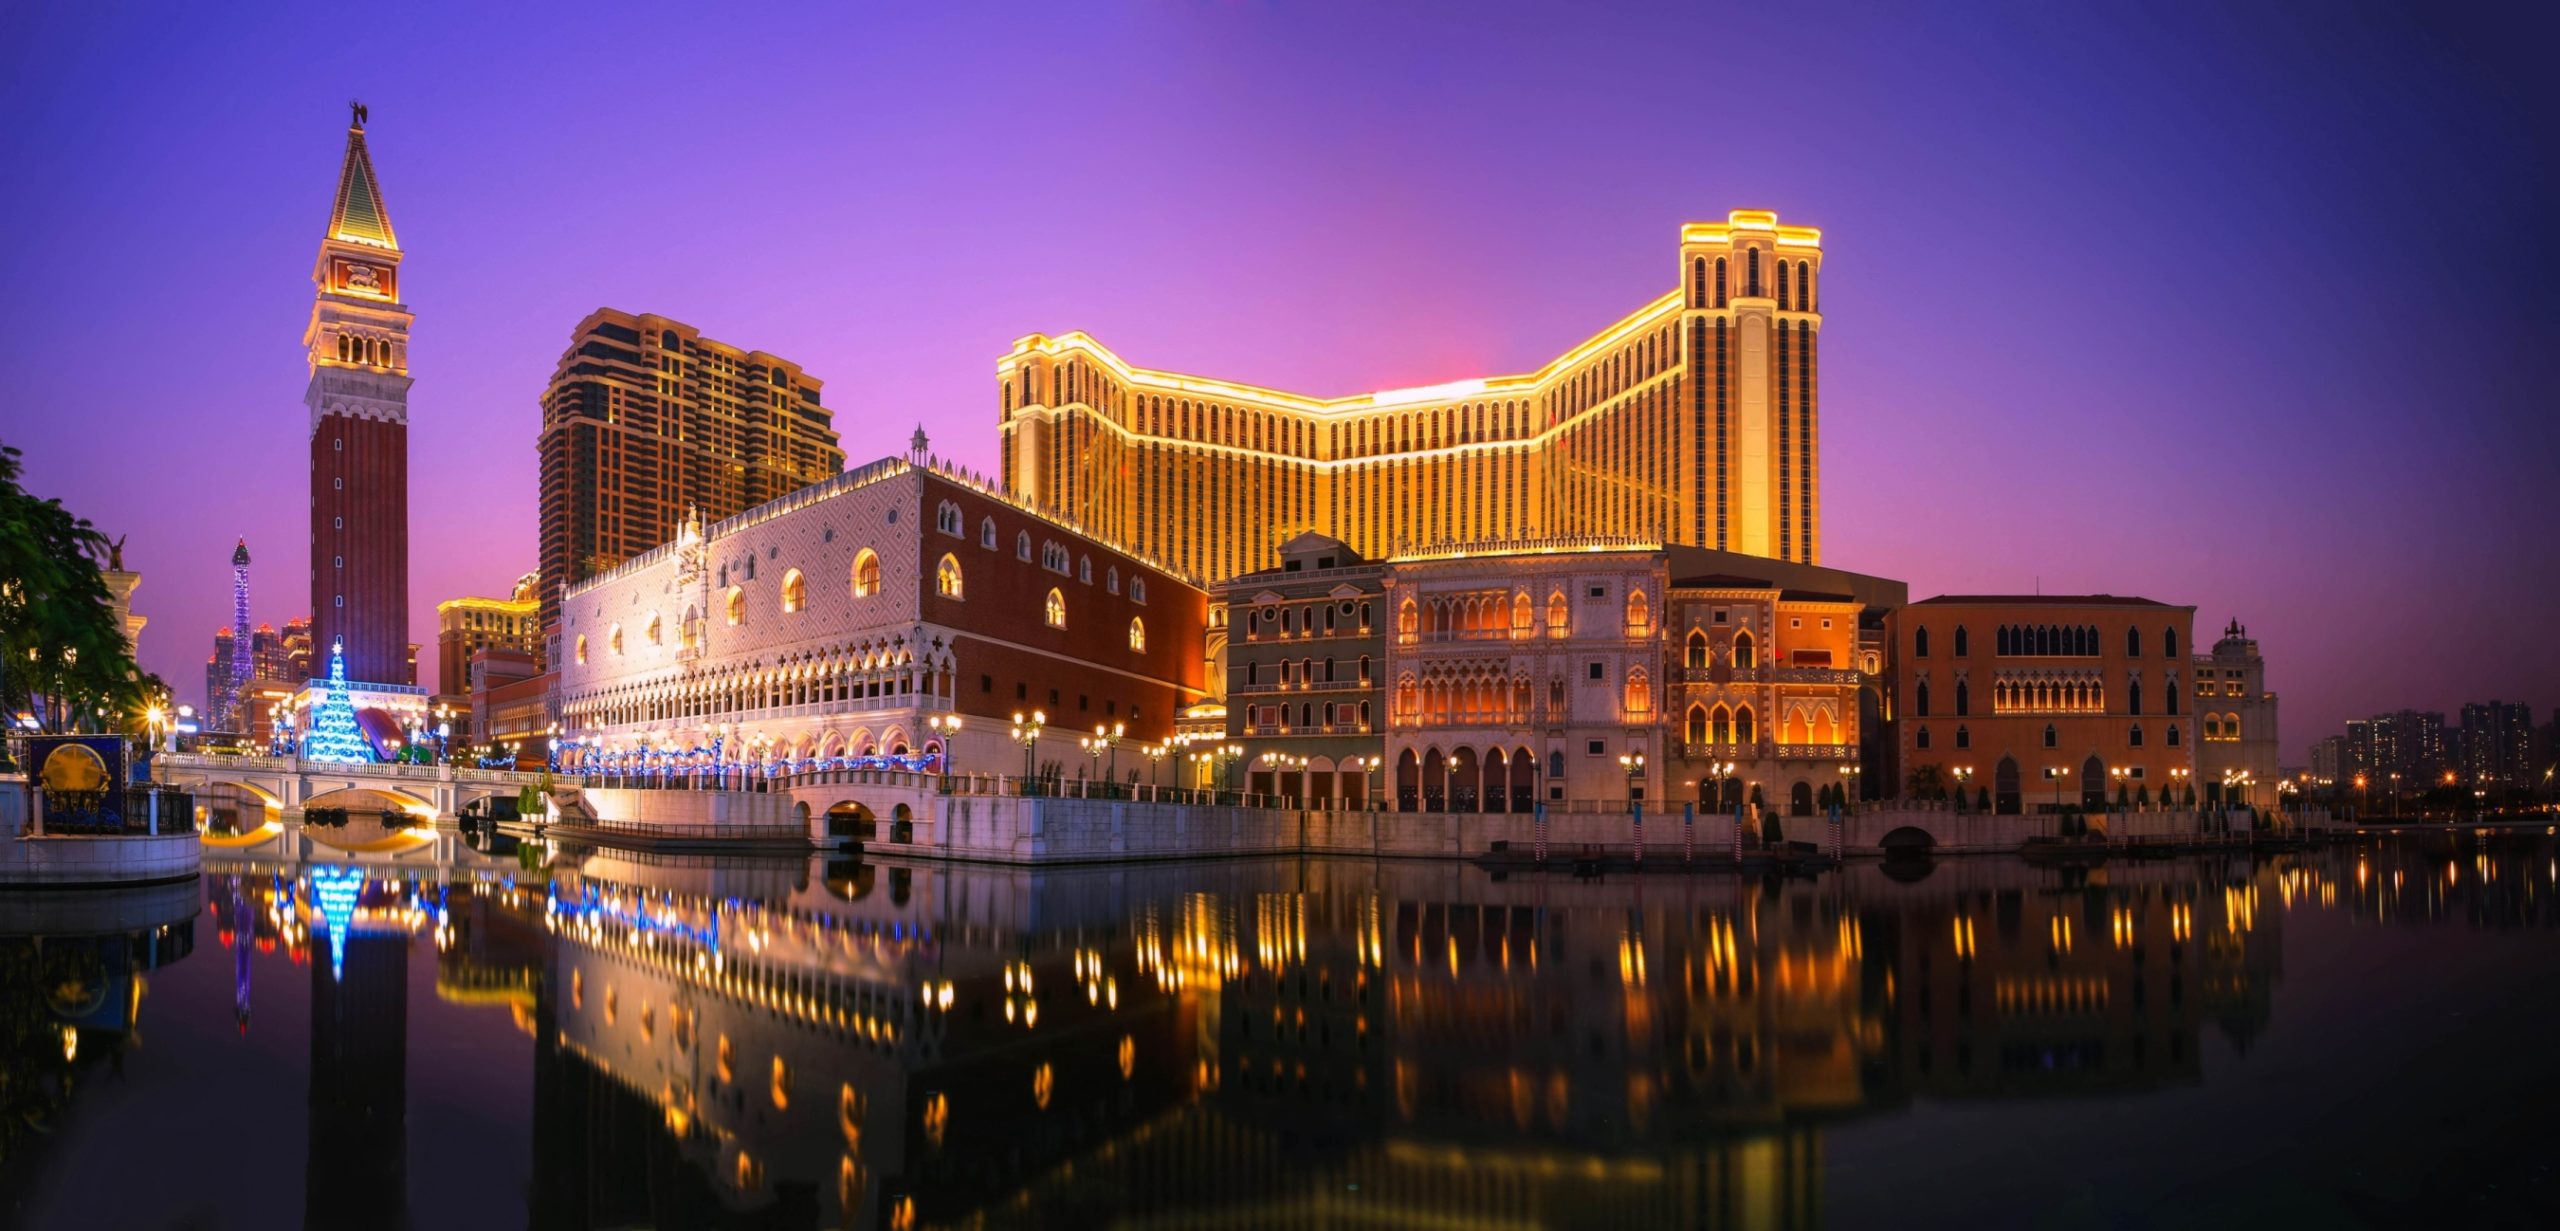 Macao Pano MFM Ville Nuit Casino Overview S1071856457 xTAS scaled